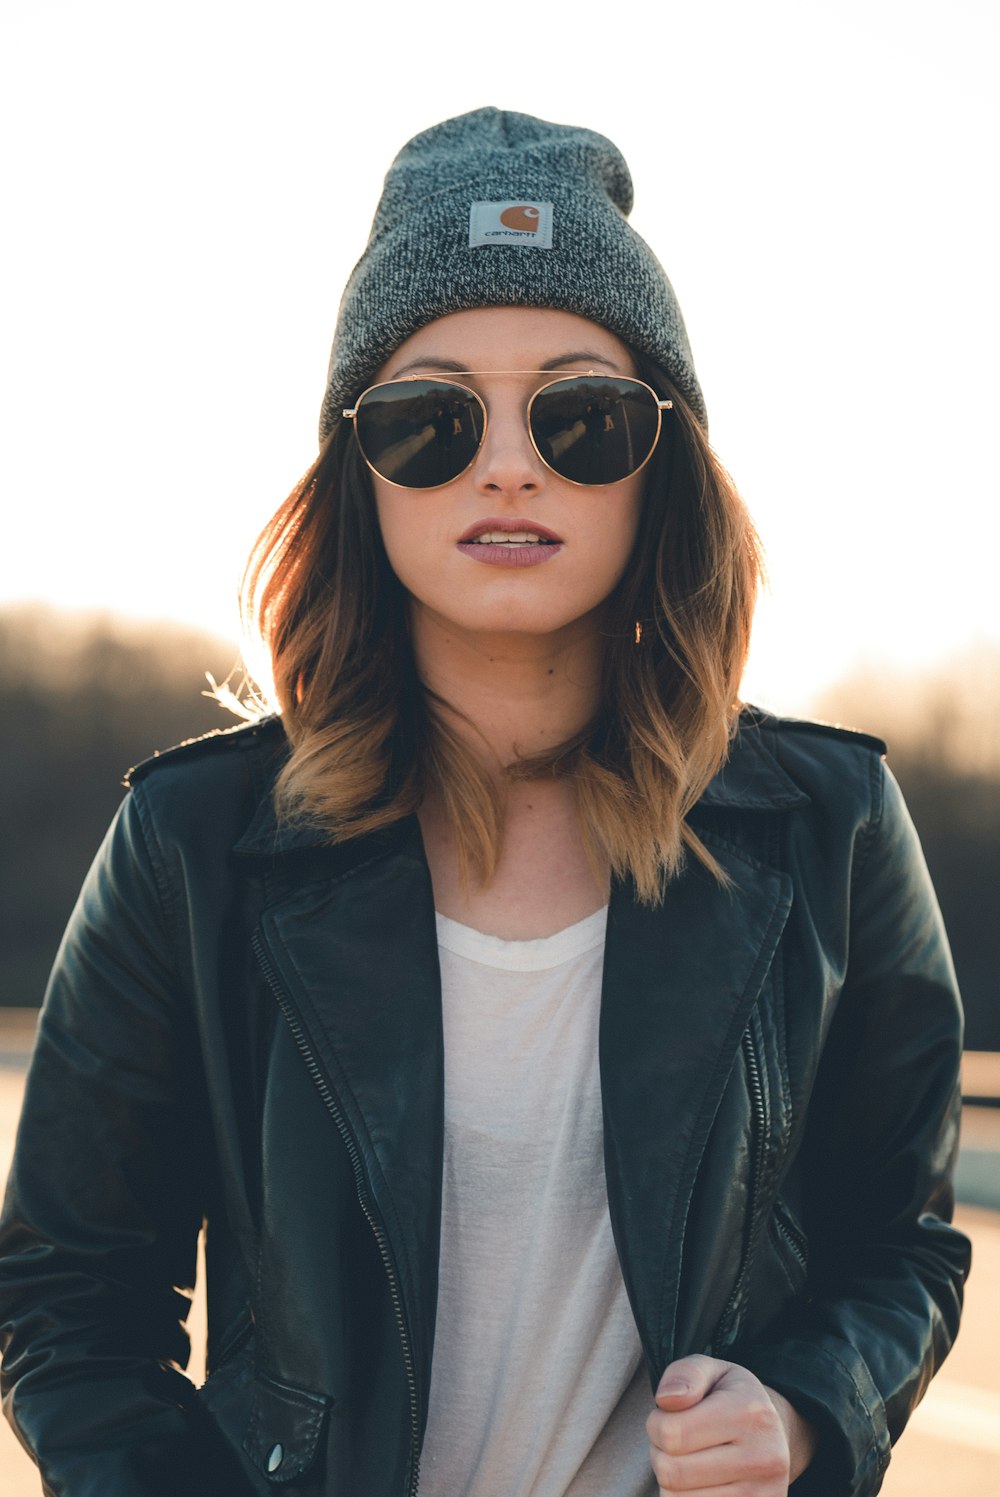 30,000+ Sunglasses Woman Pictures | Download Free Images on Unsplash